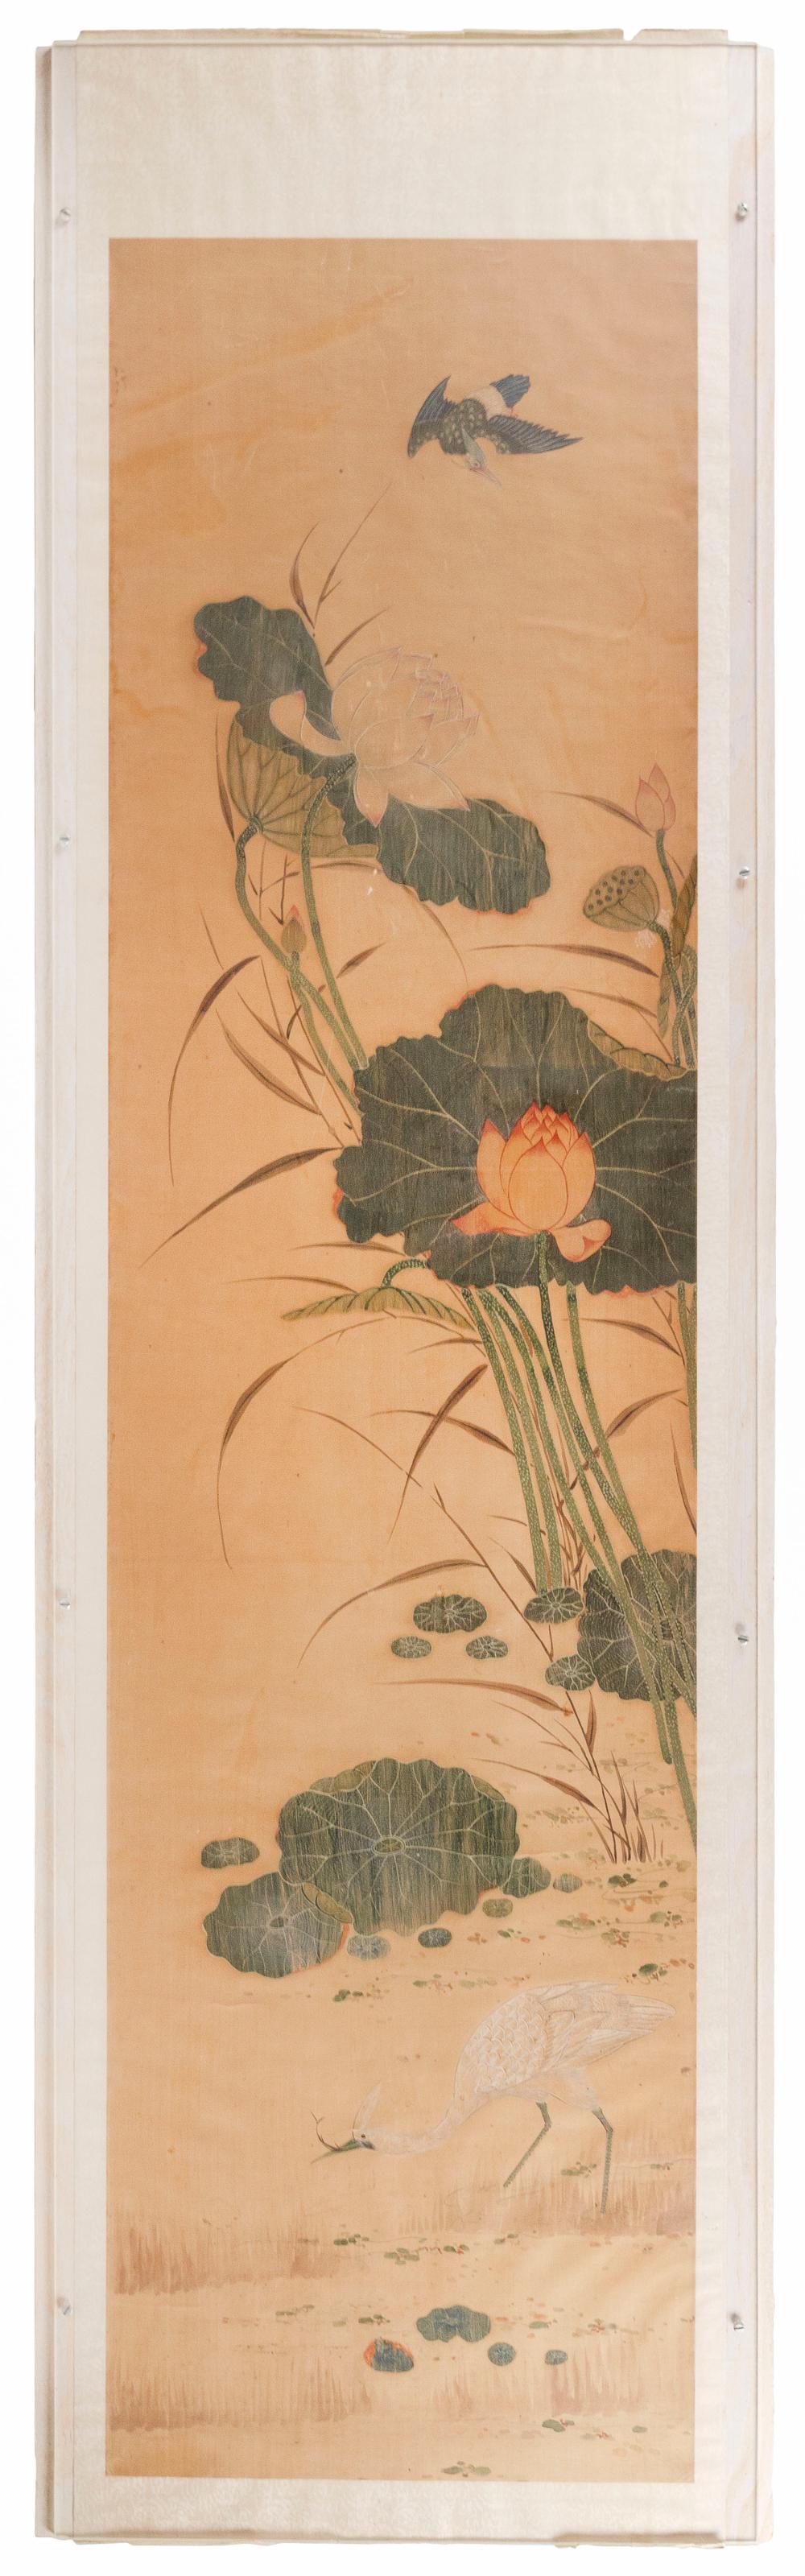 CHINESE SCROLL PAINTING ON SILK